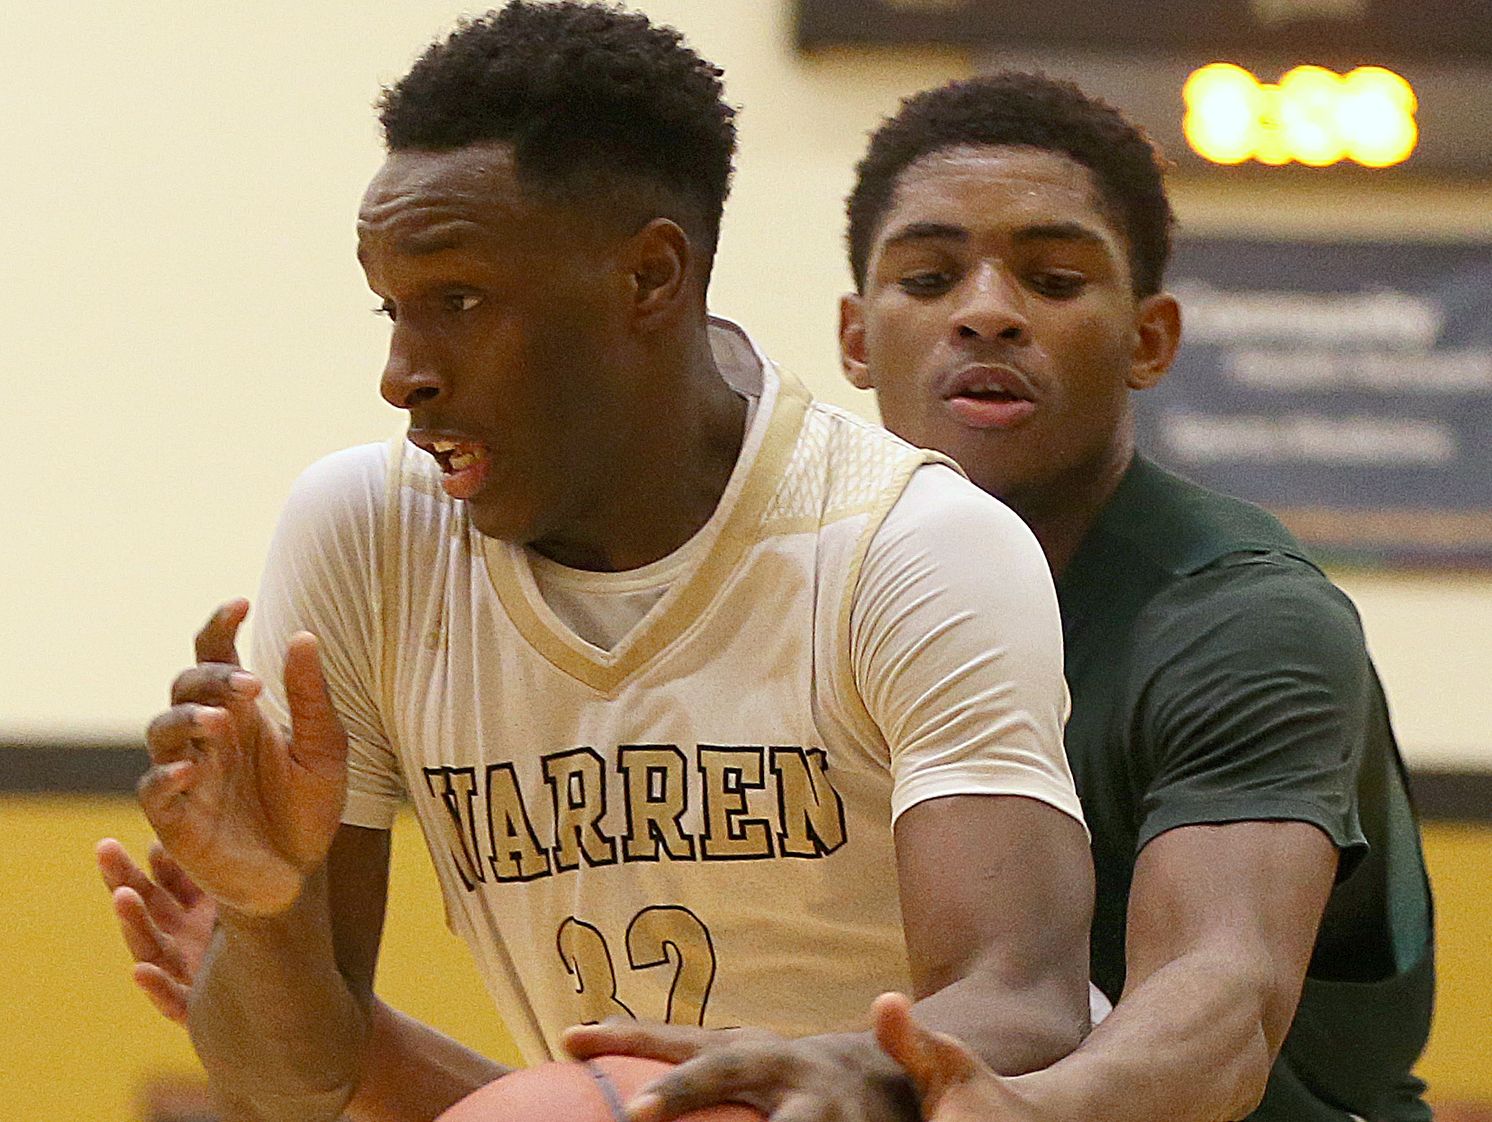 Lawrence North Wildcats forward Kevin Easley Jr. (34) fouls Warren Central Warriors forward Mack Smith (32) during second half action of Marion County boys quarterfinals between Warren Central and Lawrence North, at Warren Central High School, Indianapolis, Wednesday, Jan. 11, 2016. Warren Central defeated Lawrence North, 52-43.